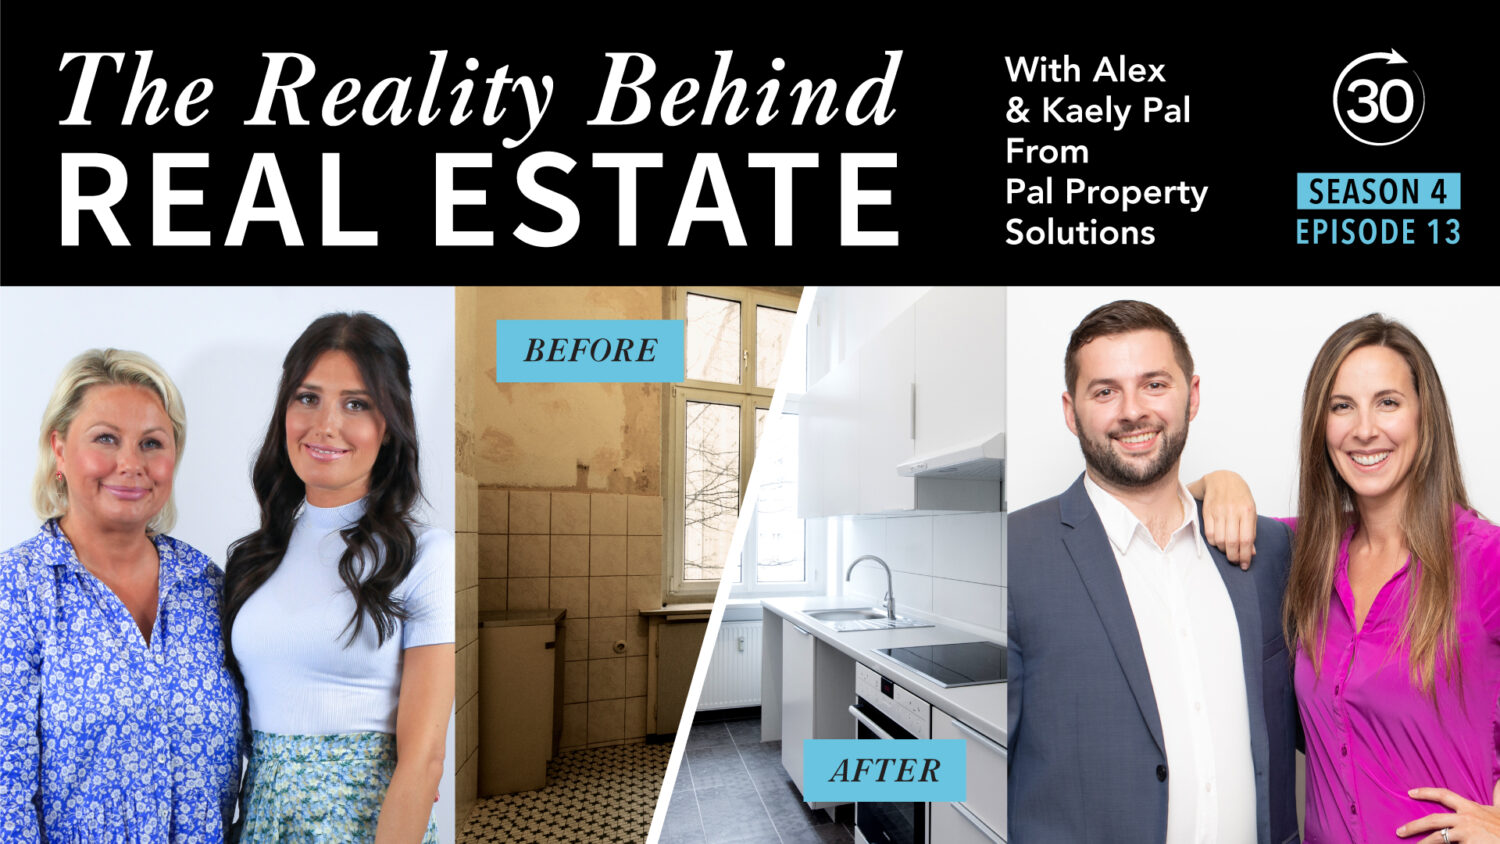 S4 E13 - The Reality Behind Real Estate